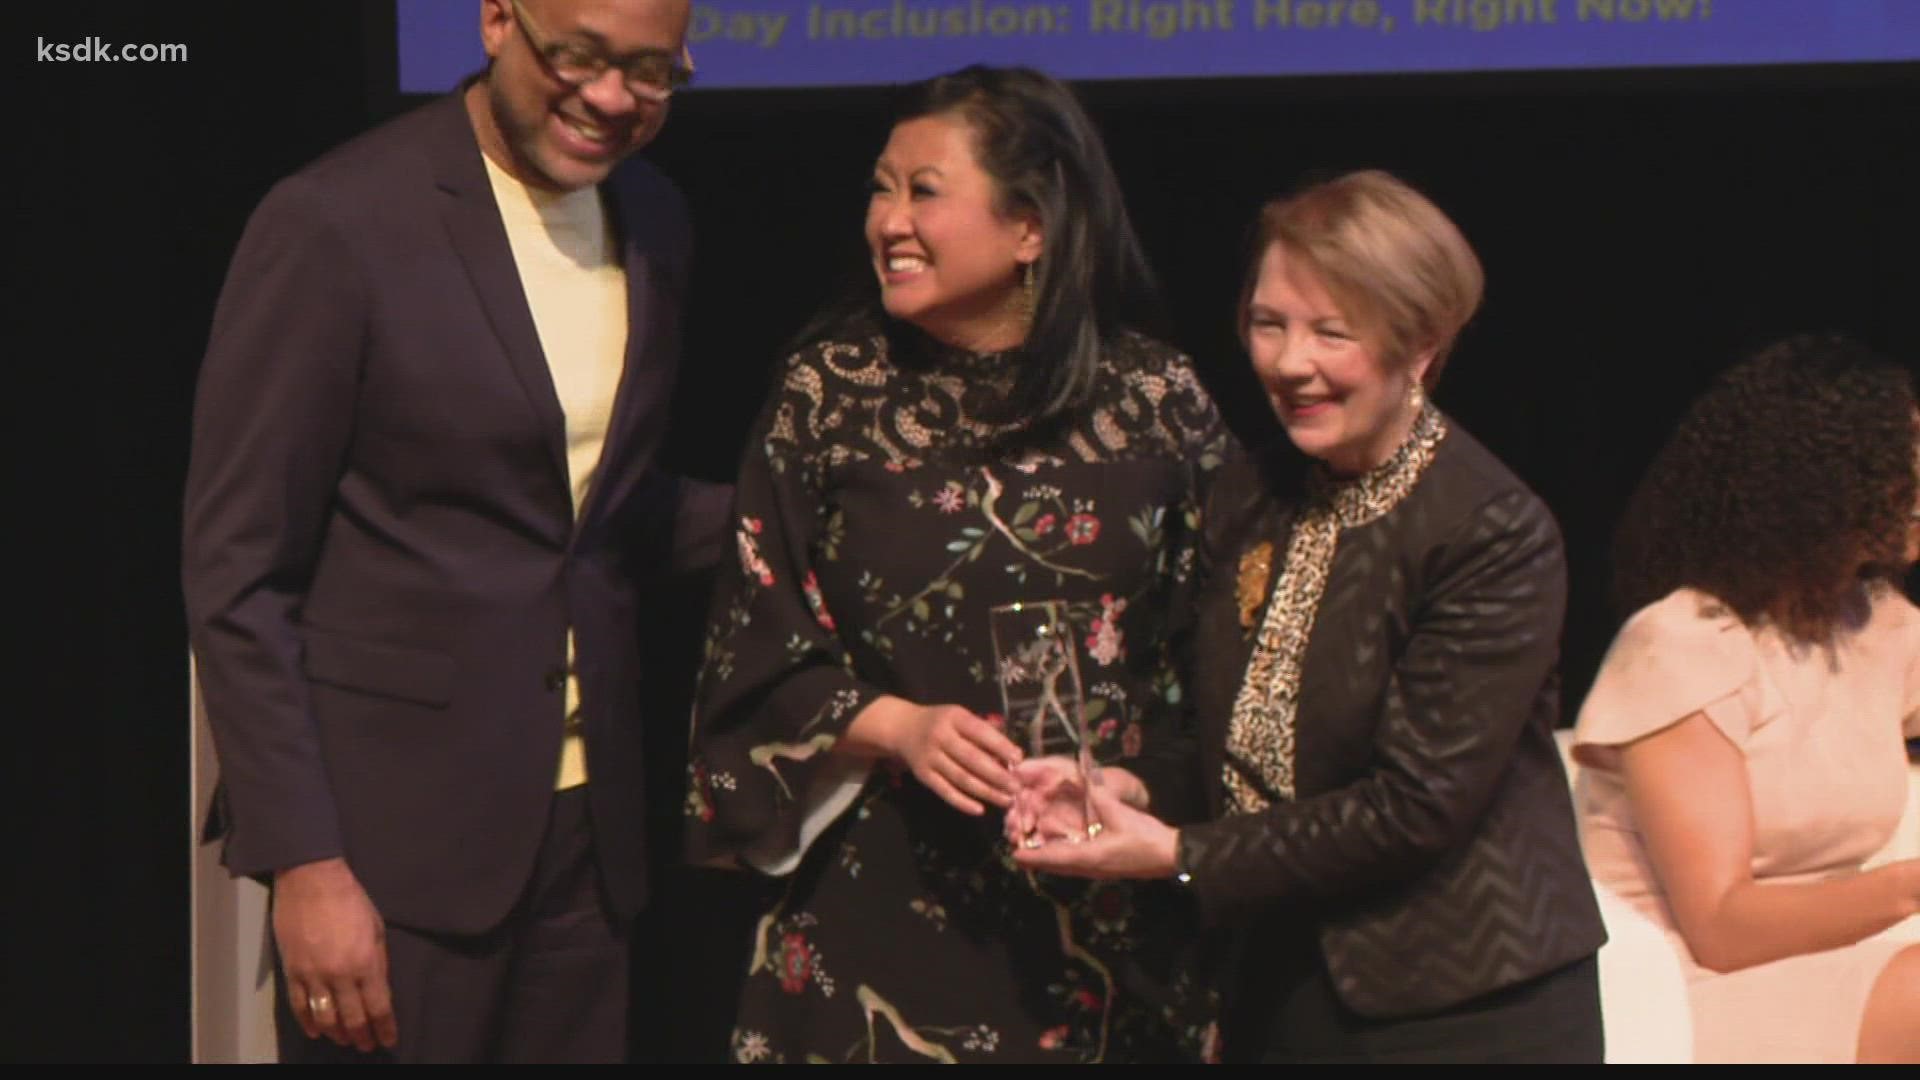 5 On Your Side anchor Michelle Li was honored by Webster University as a "game-changer" in diversity and inclusion.